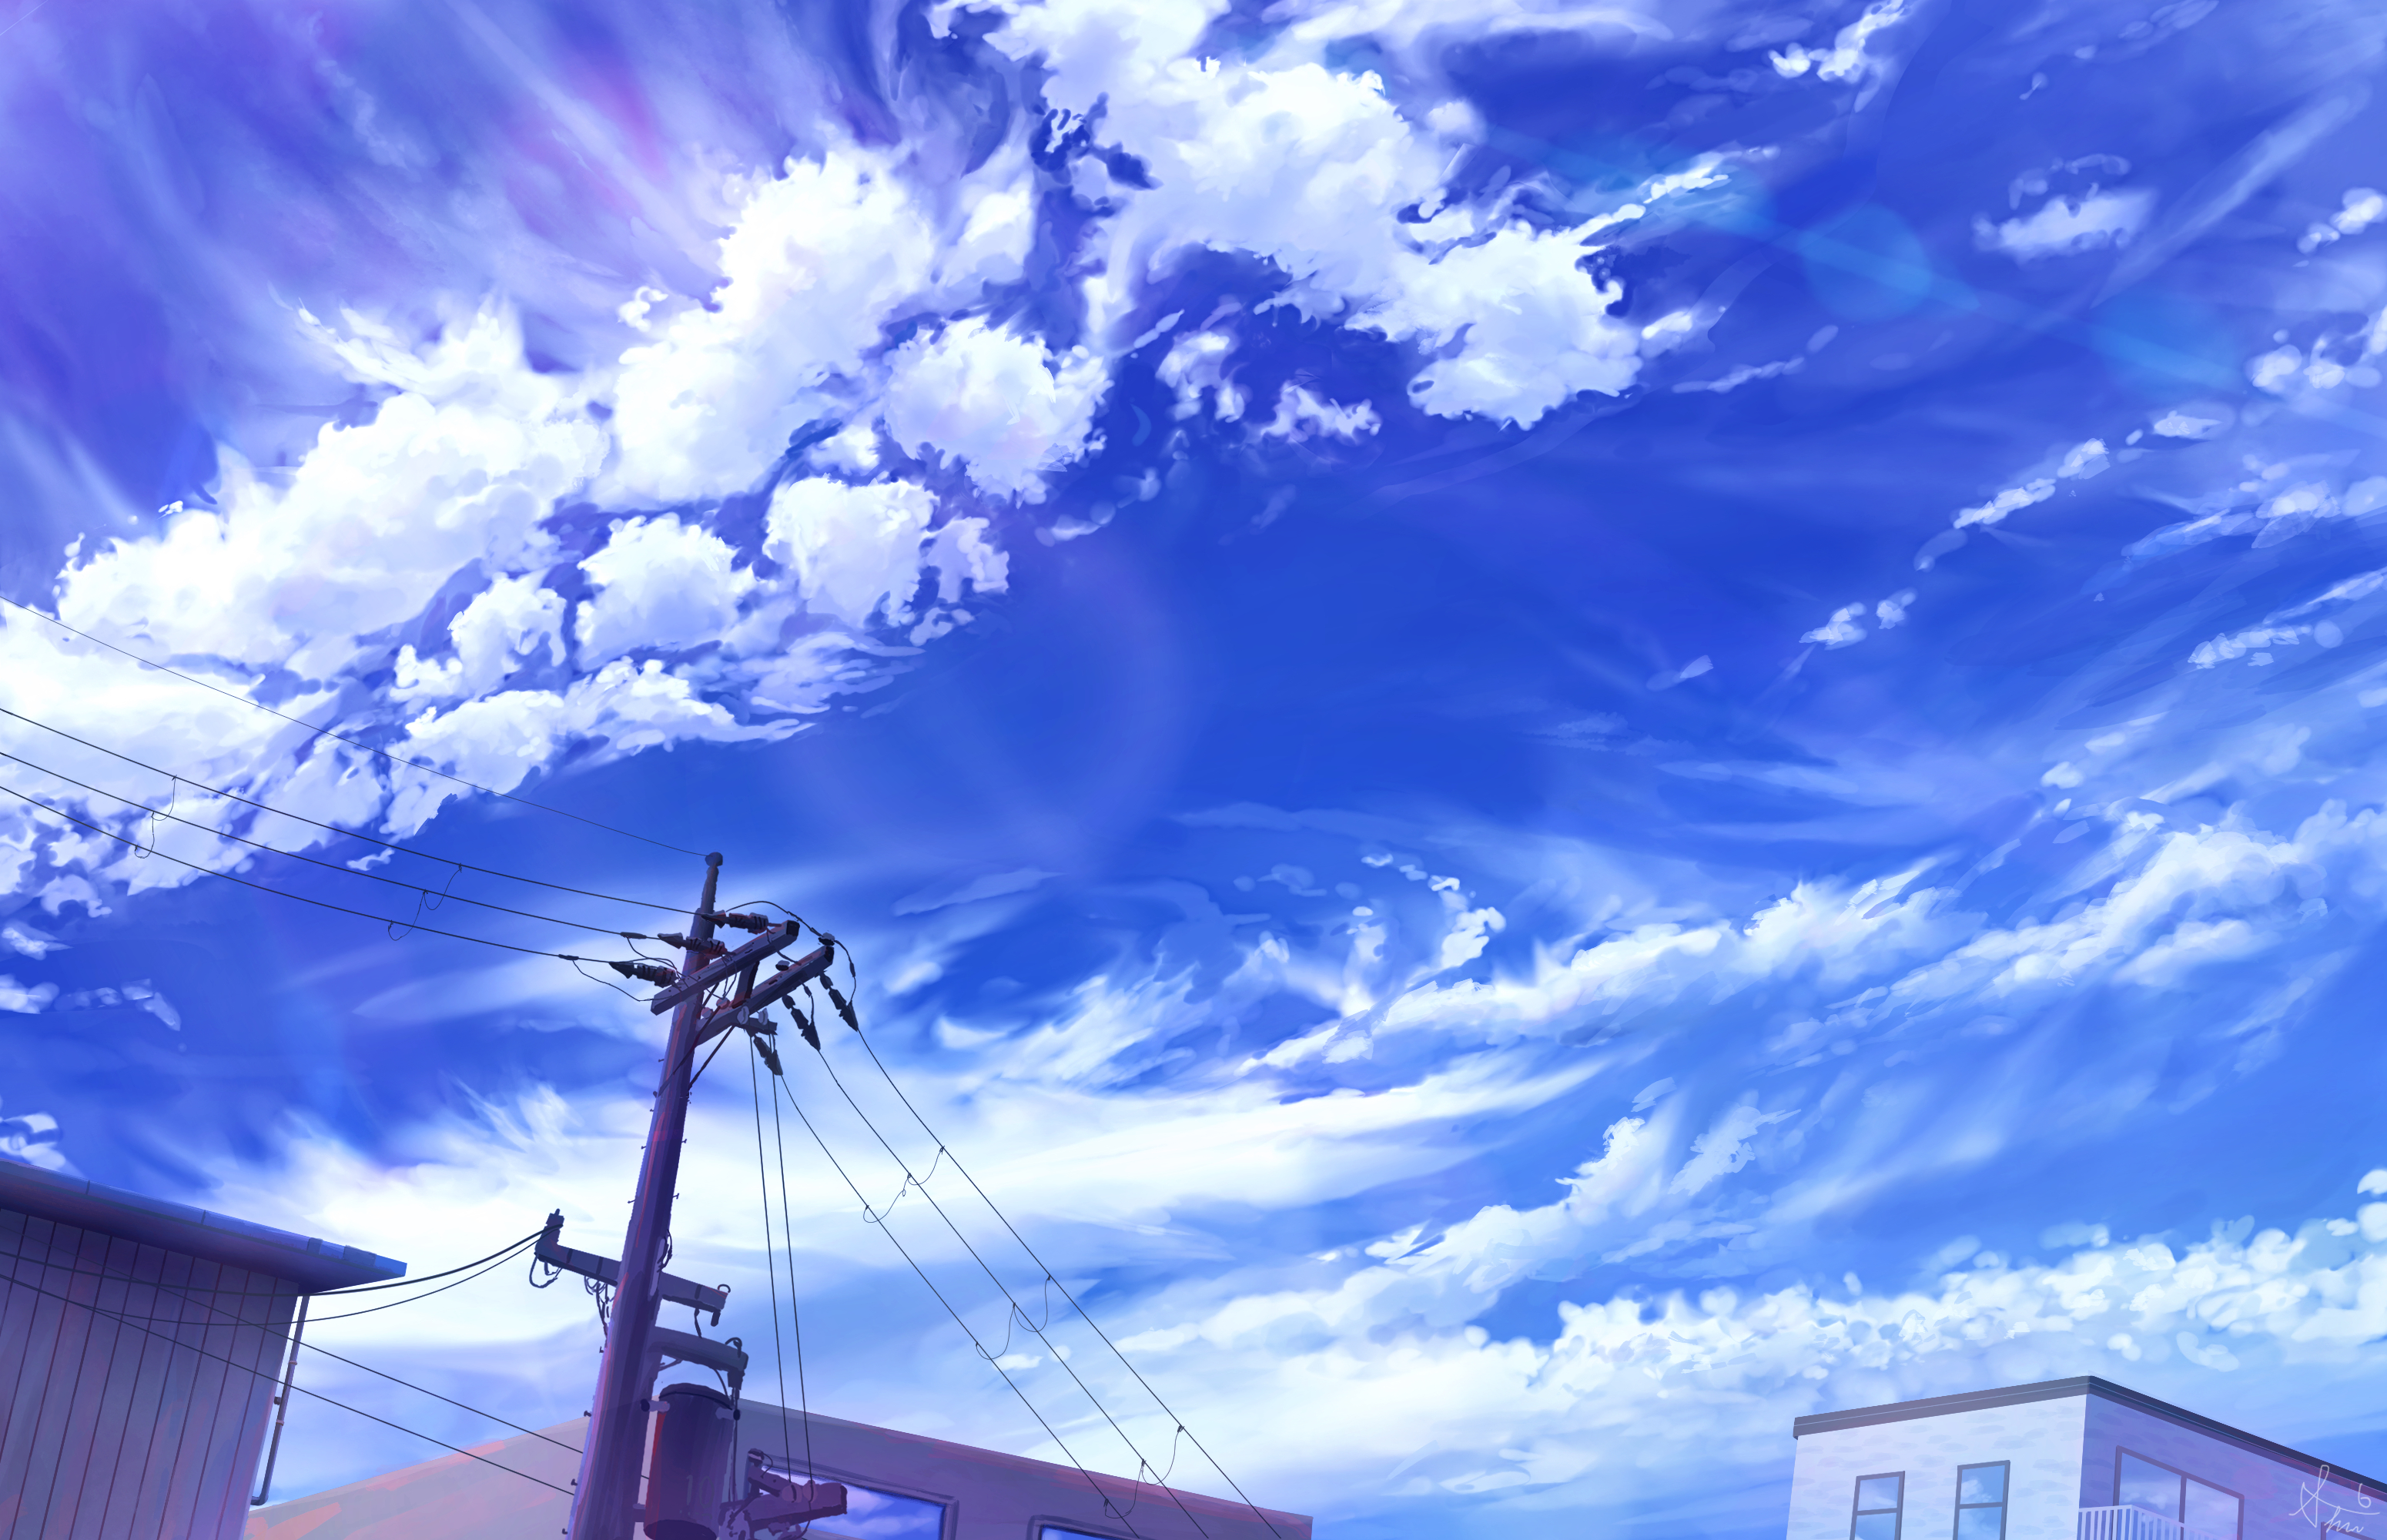 Blue Sky With Clouds. Blue Sky With Clouds In Manga, Anime, Comic Style.  Digital Art Style, Illustration Painting. Stock Photo, Picture and Royalty  Free Image. Image 196768212.